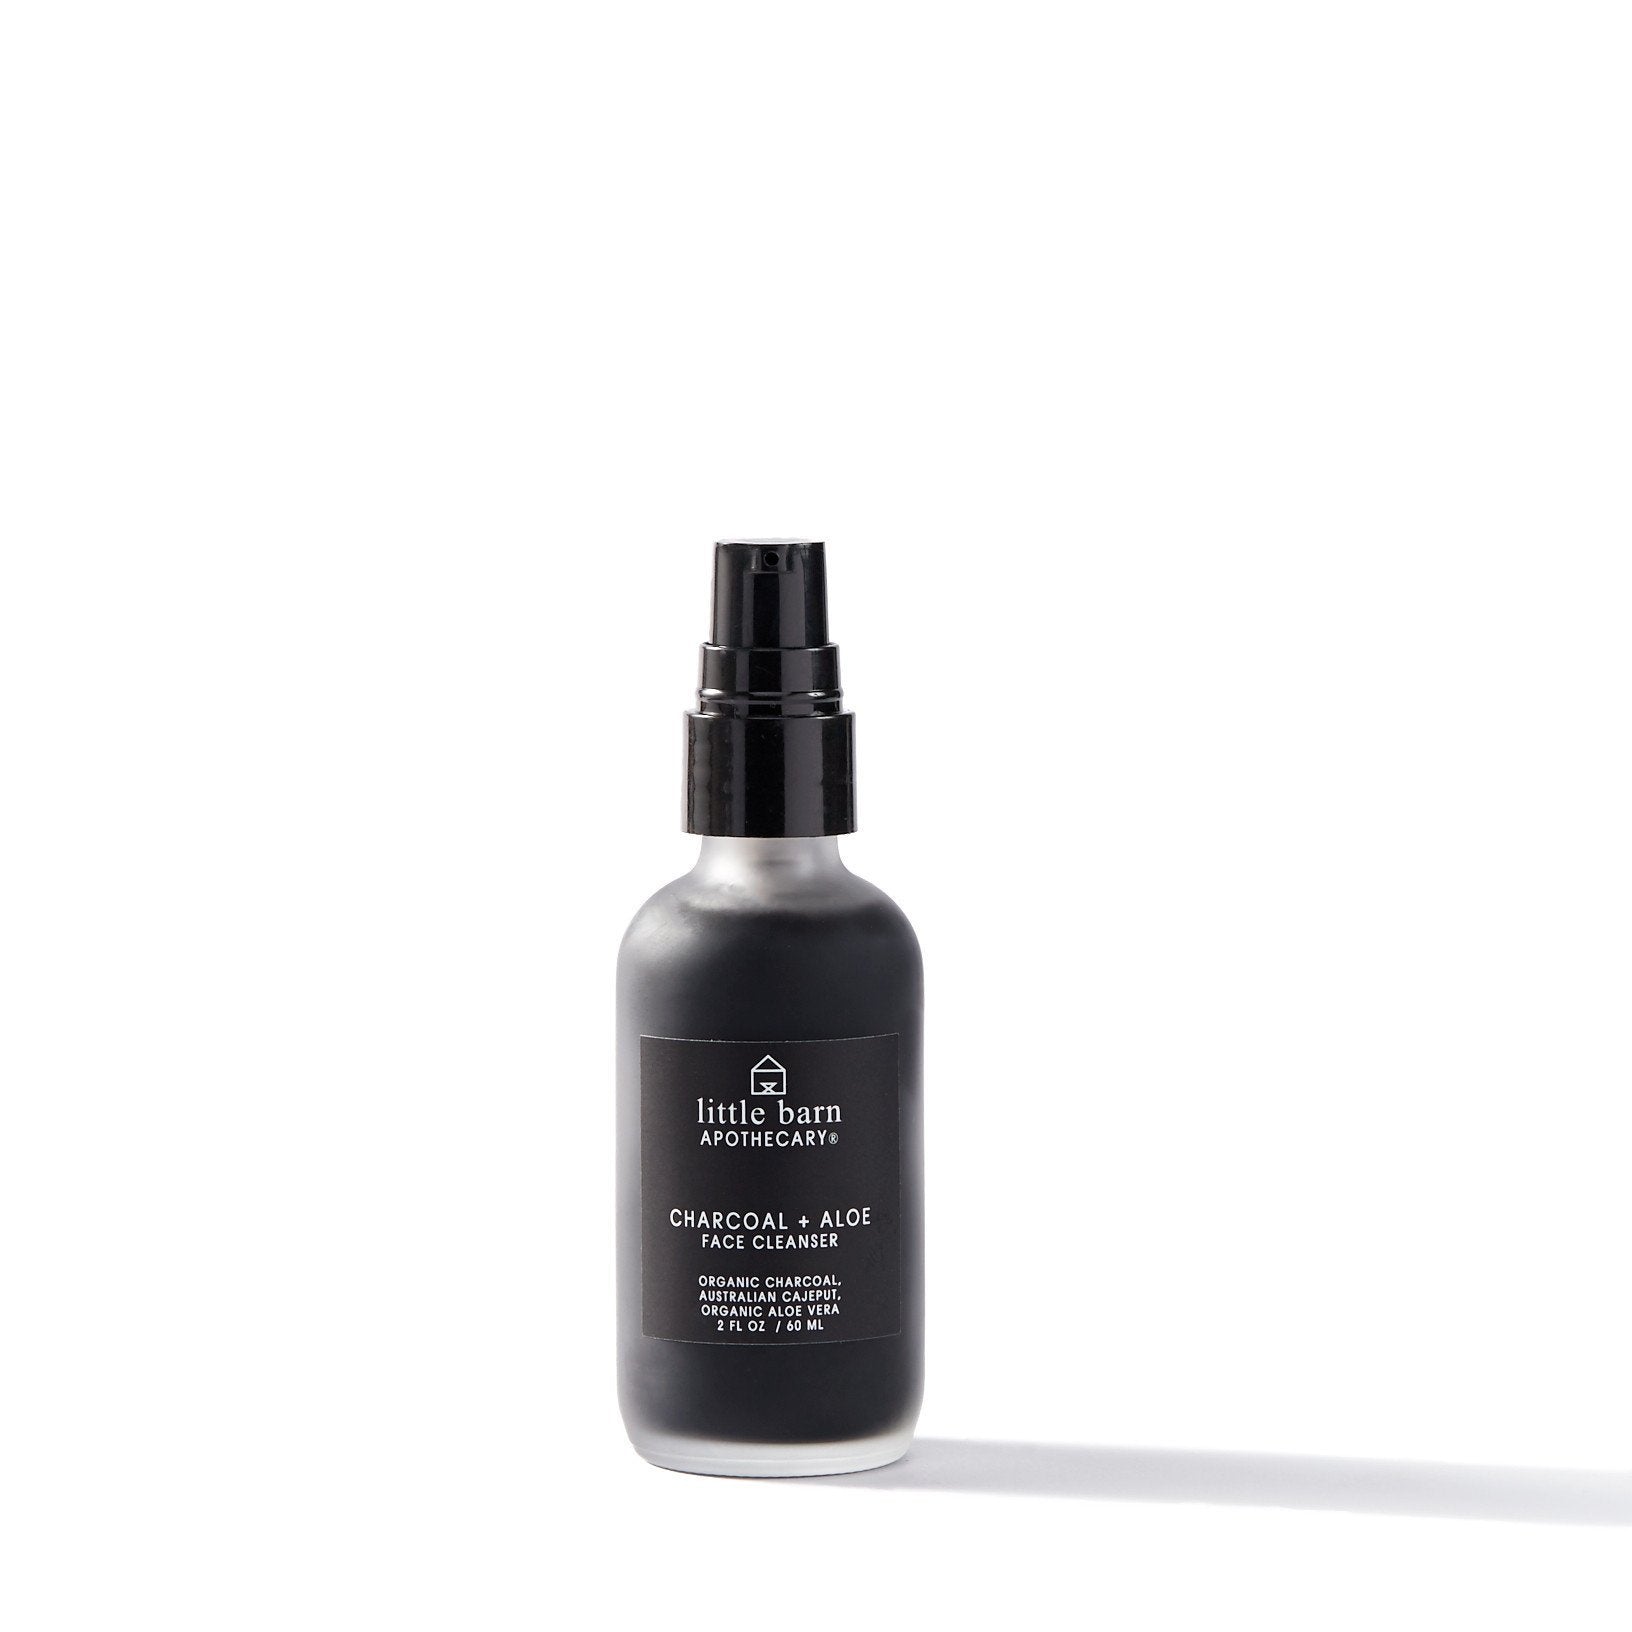 Charcoal + Aloe Face Cleanser by Little Barn Apothecary